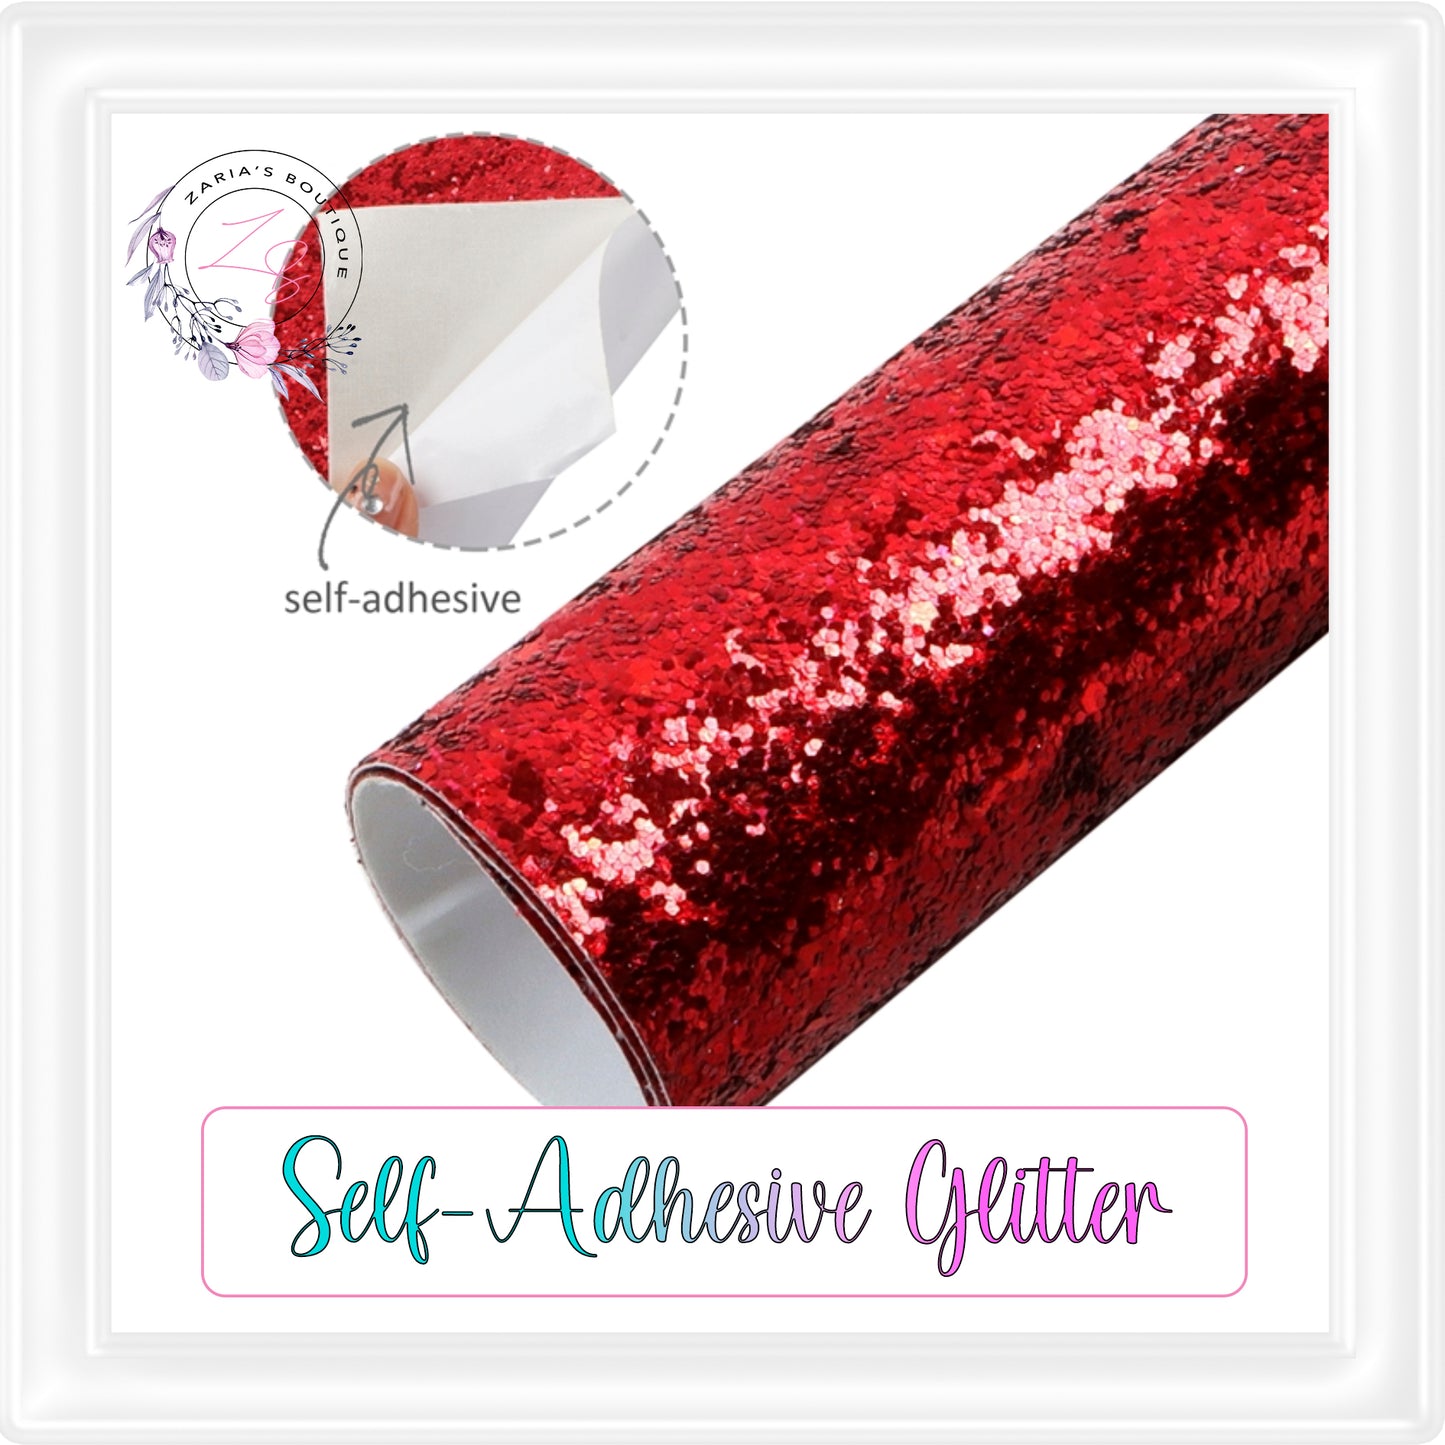 ⋅ Self-Adhesive Backed Medium Glitter ⋅ For Double-Sided Projects ⋅ RED ⋅